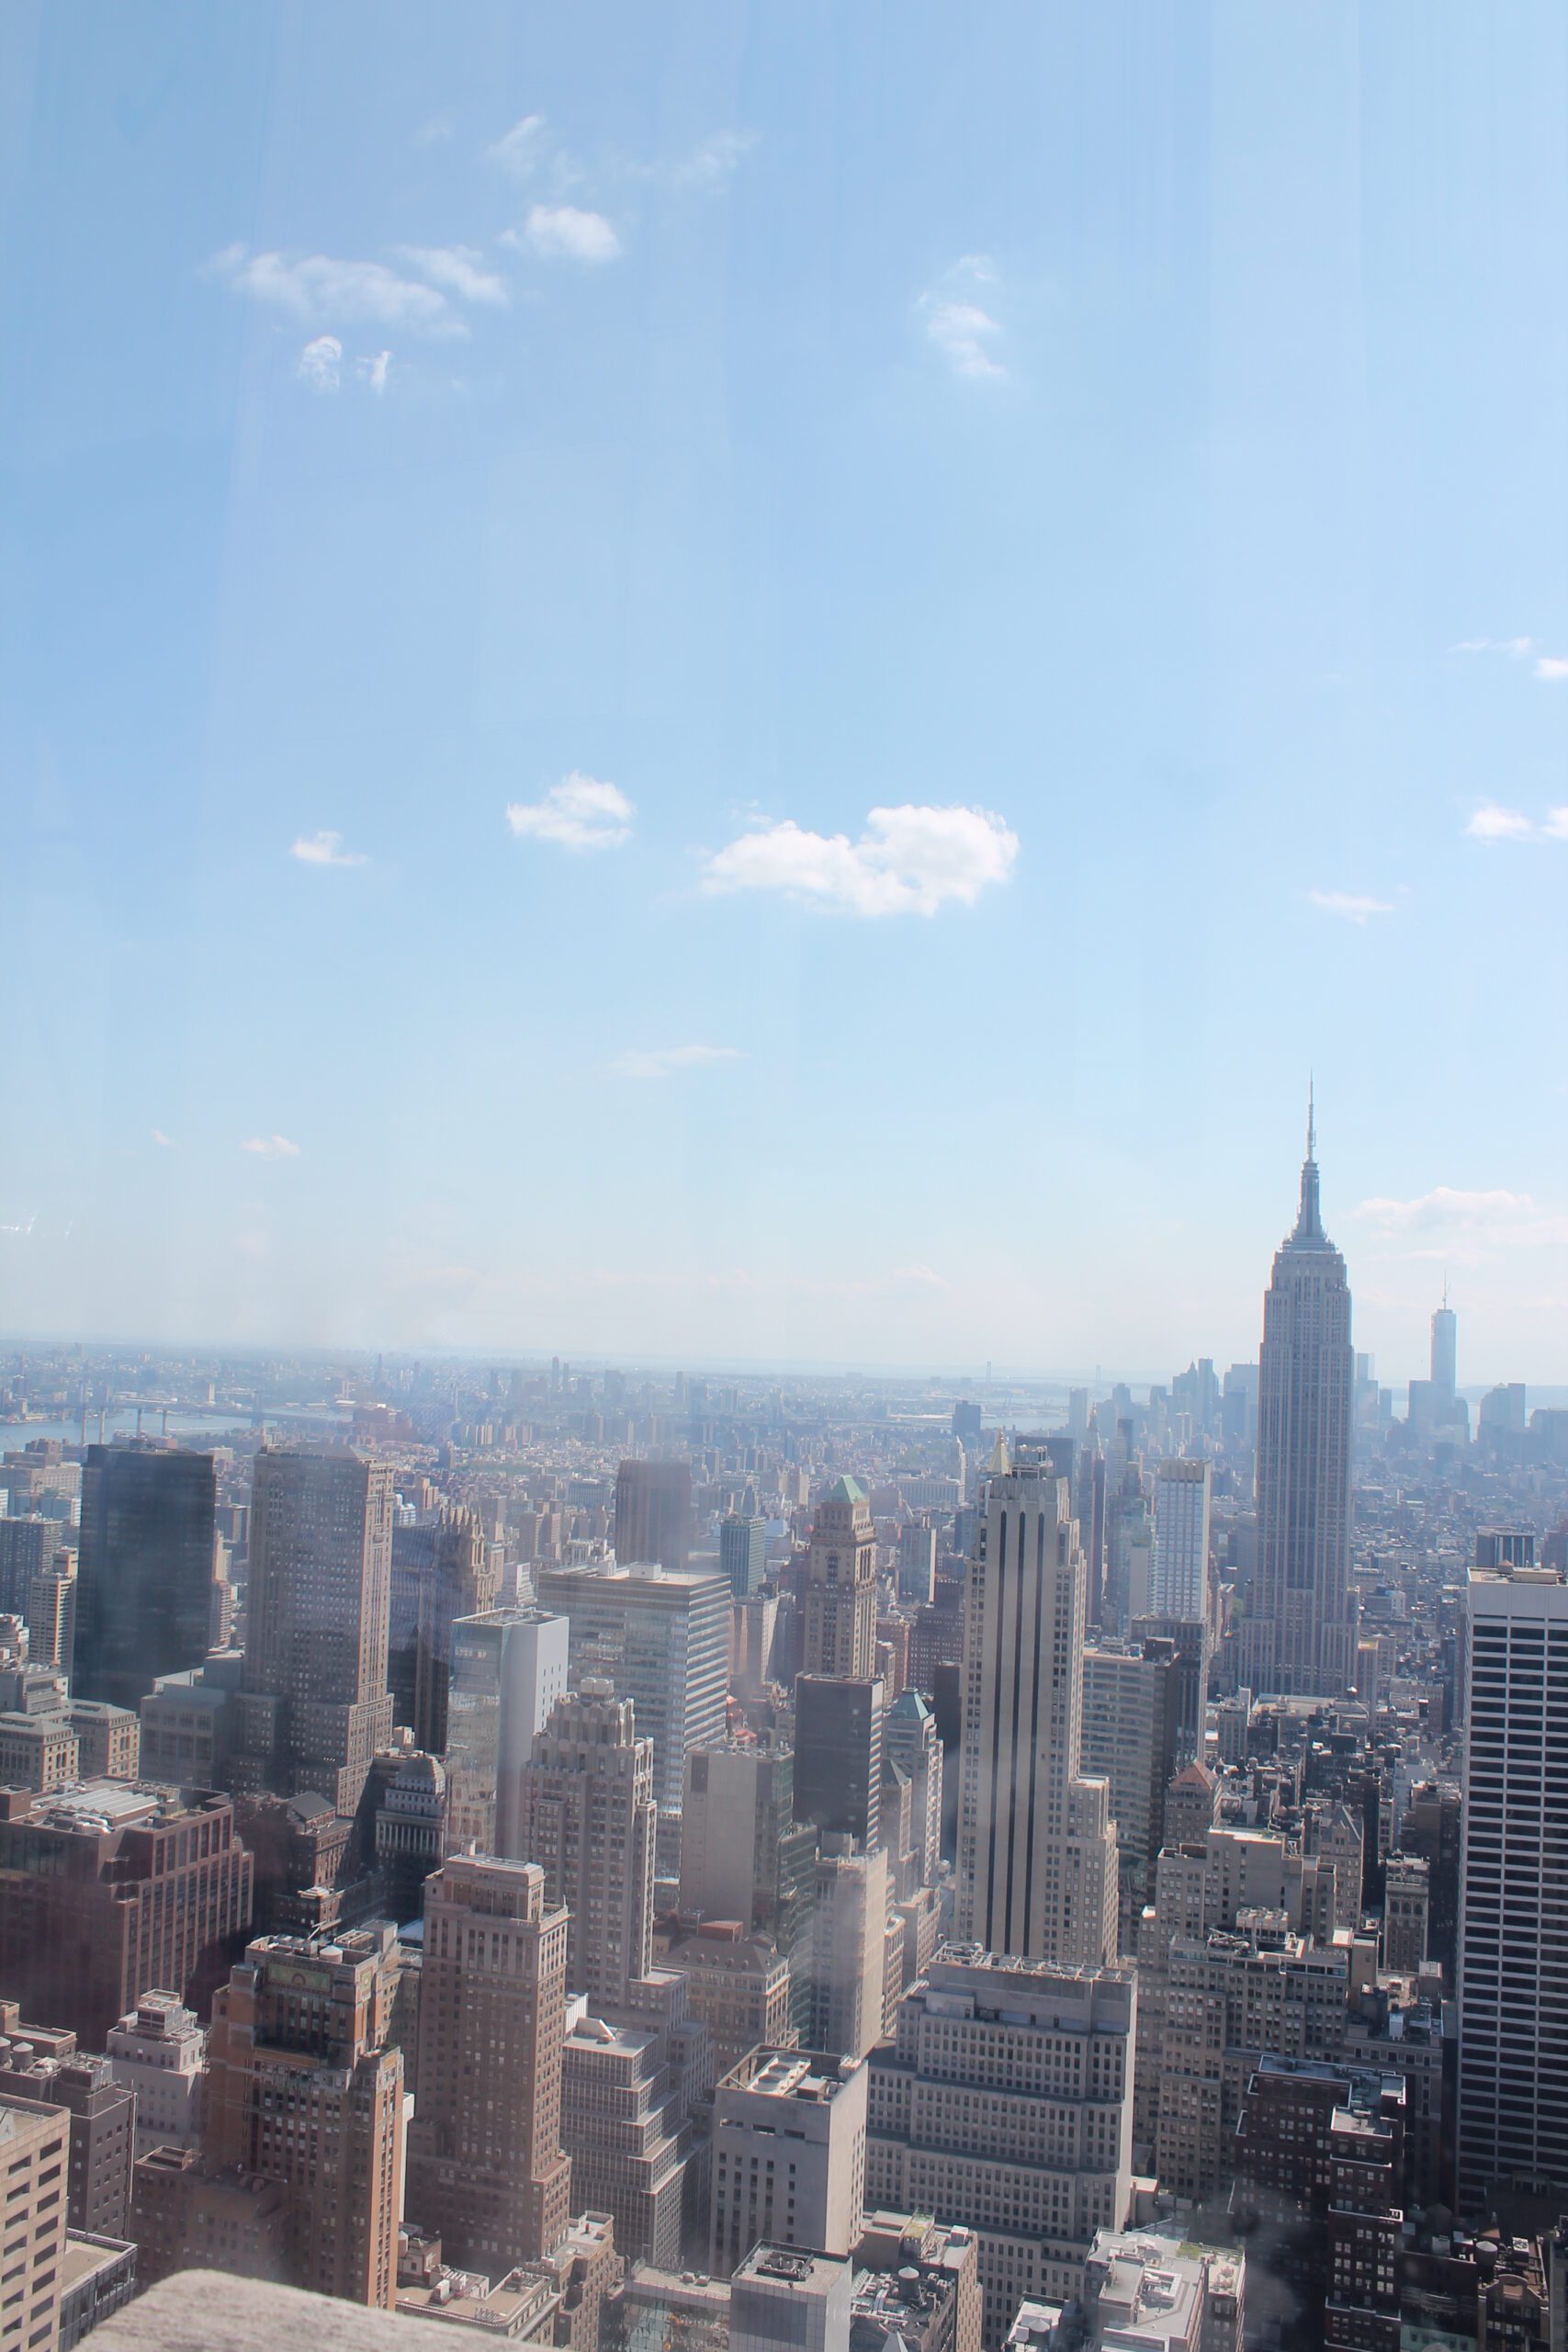 A view of New York from the Top of the Rockefeller Center. (Photo: Super G)